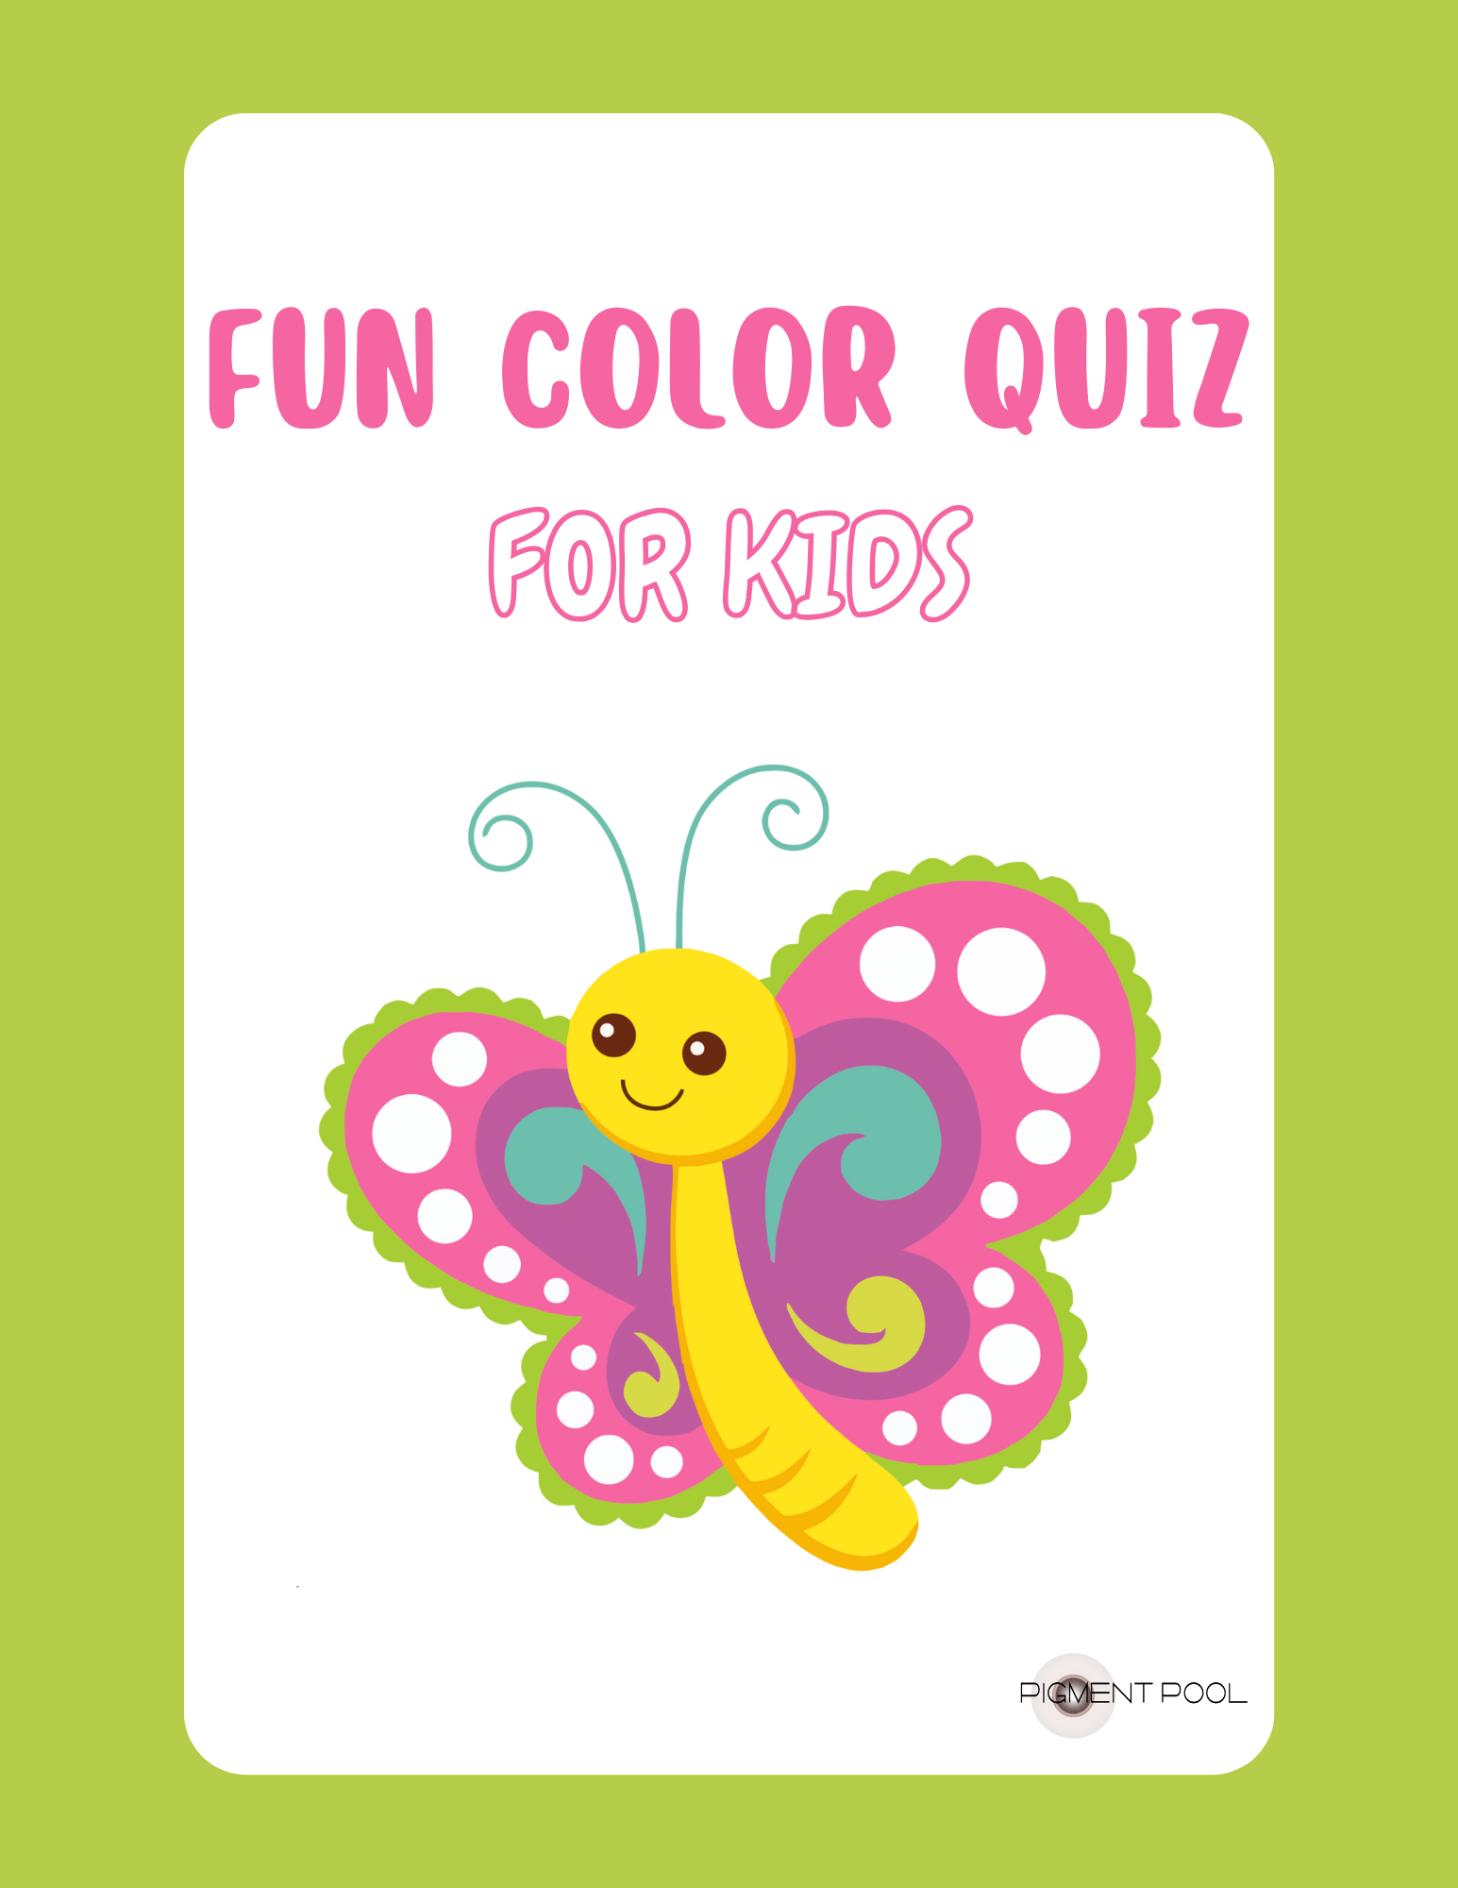 Fun Color Quiz by Pigment Pool for Kids